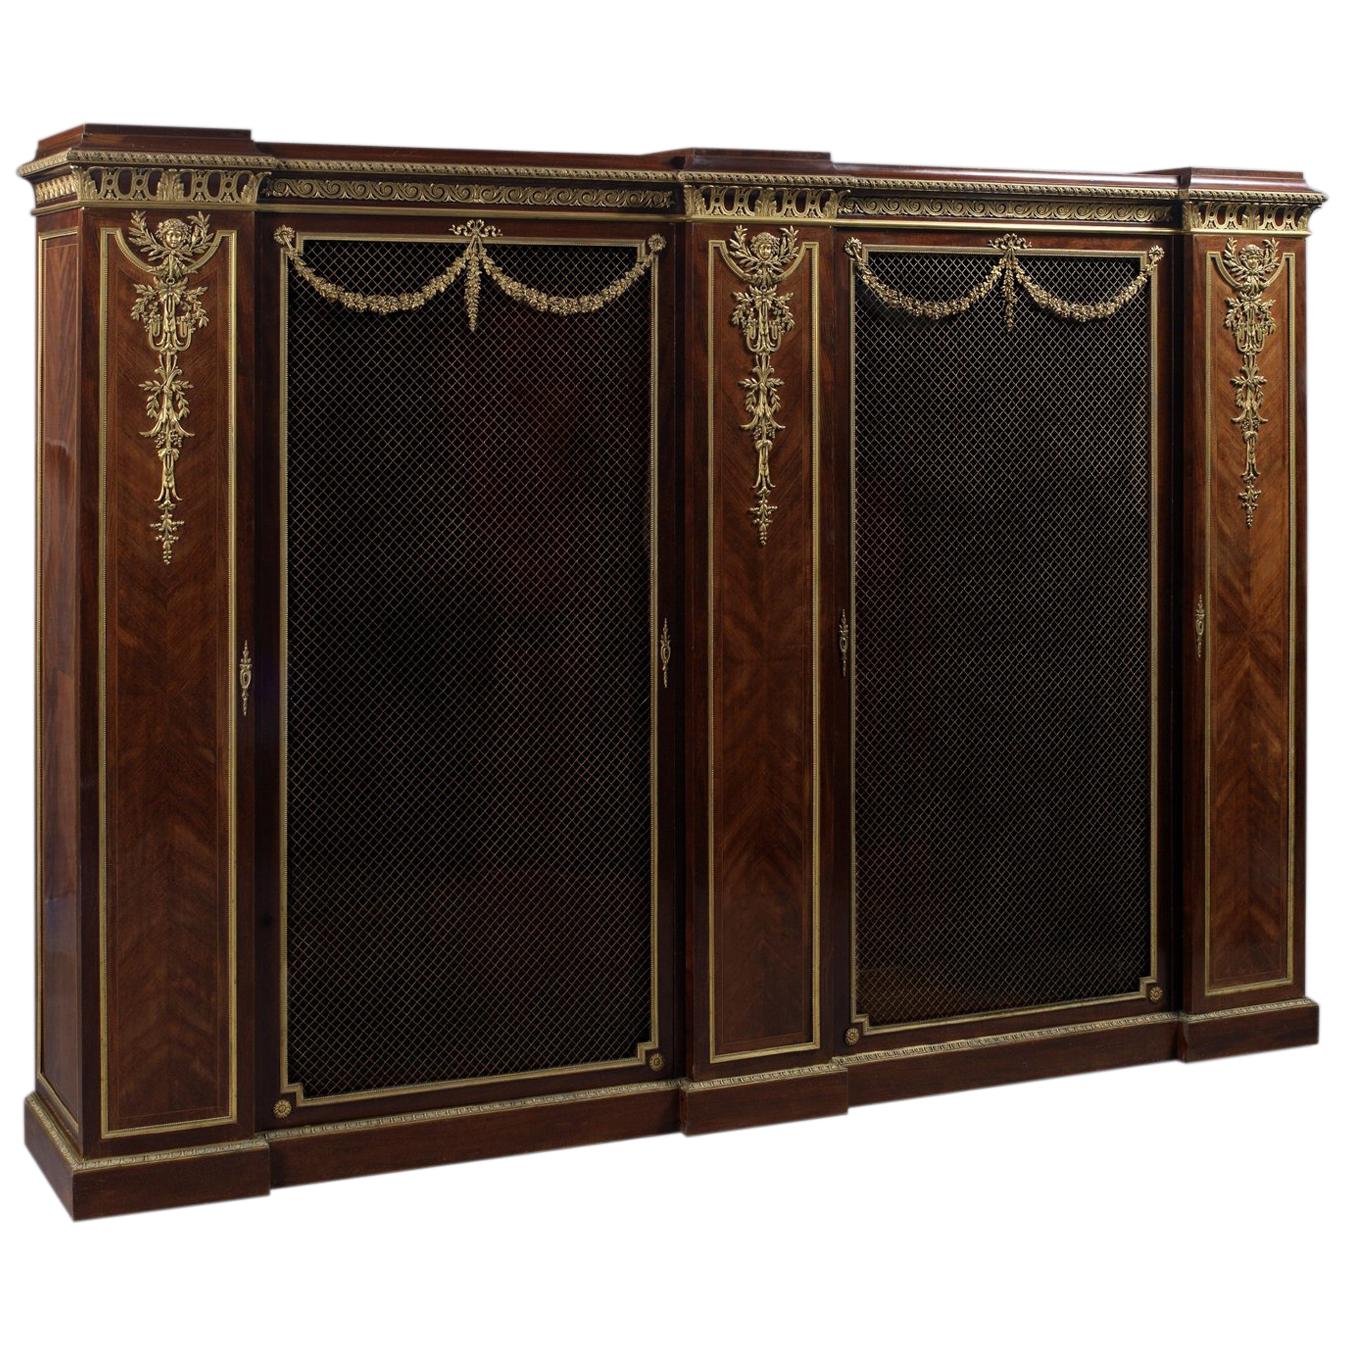 Gilt-Bronze Mounted Mahogany and Satine Bookcase by François Linke, circa 1890